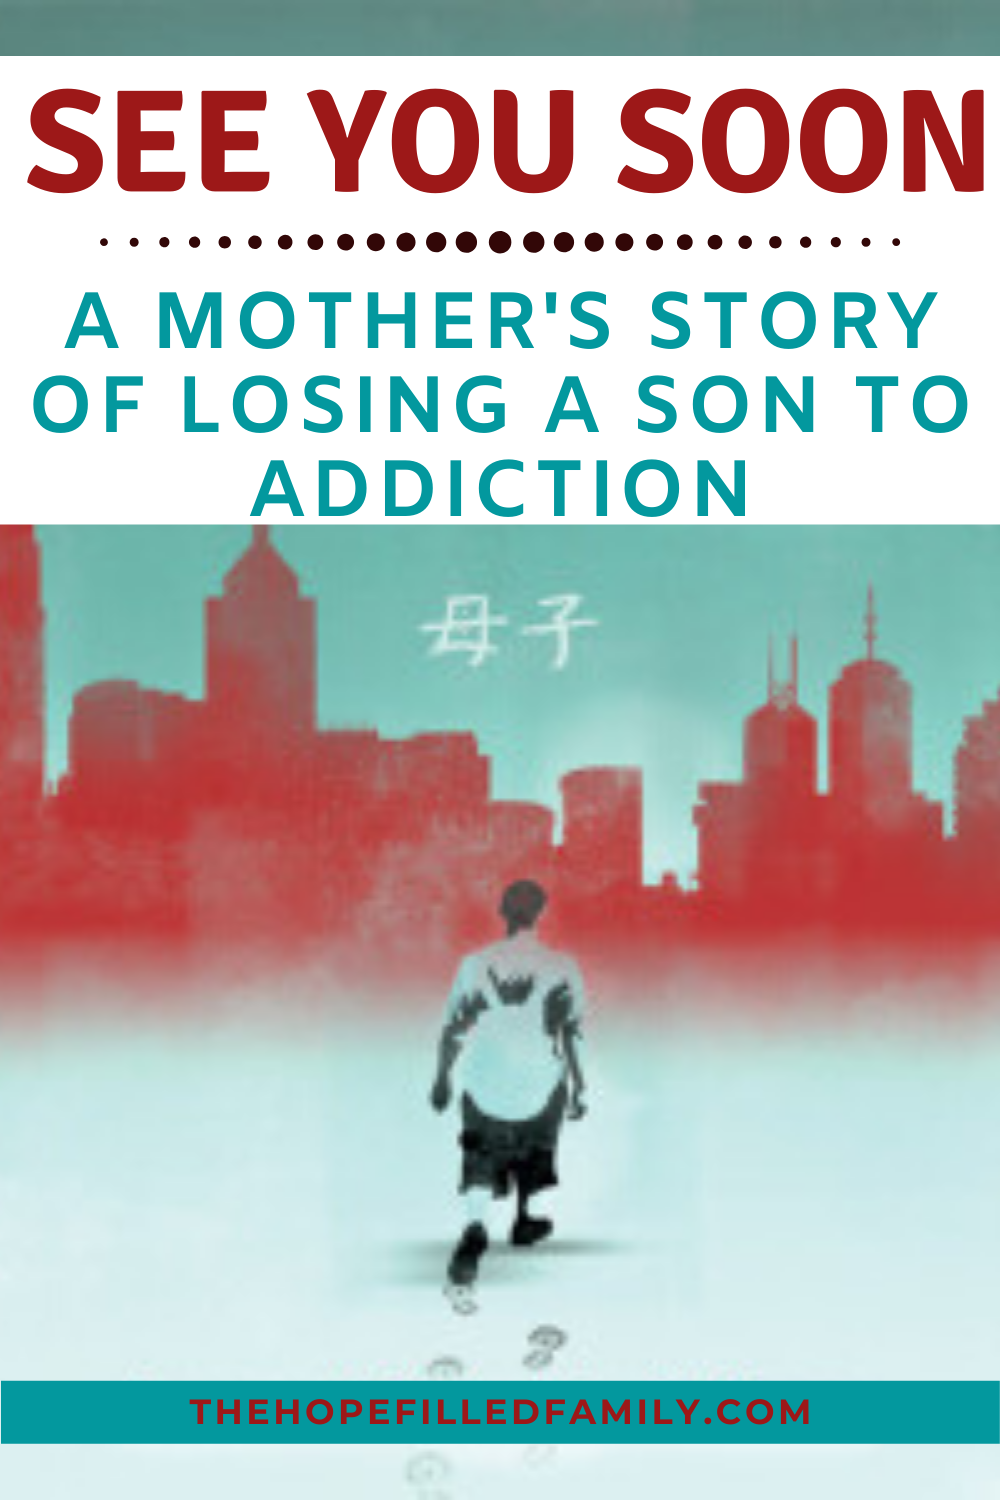 A Christian parent's story of losing a son to addiction. Death by drugs is a taboo, not least in Christian circles. So how did this couple cope?